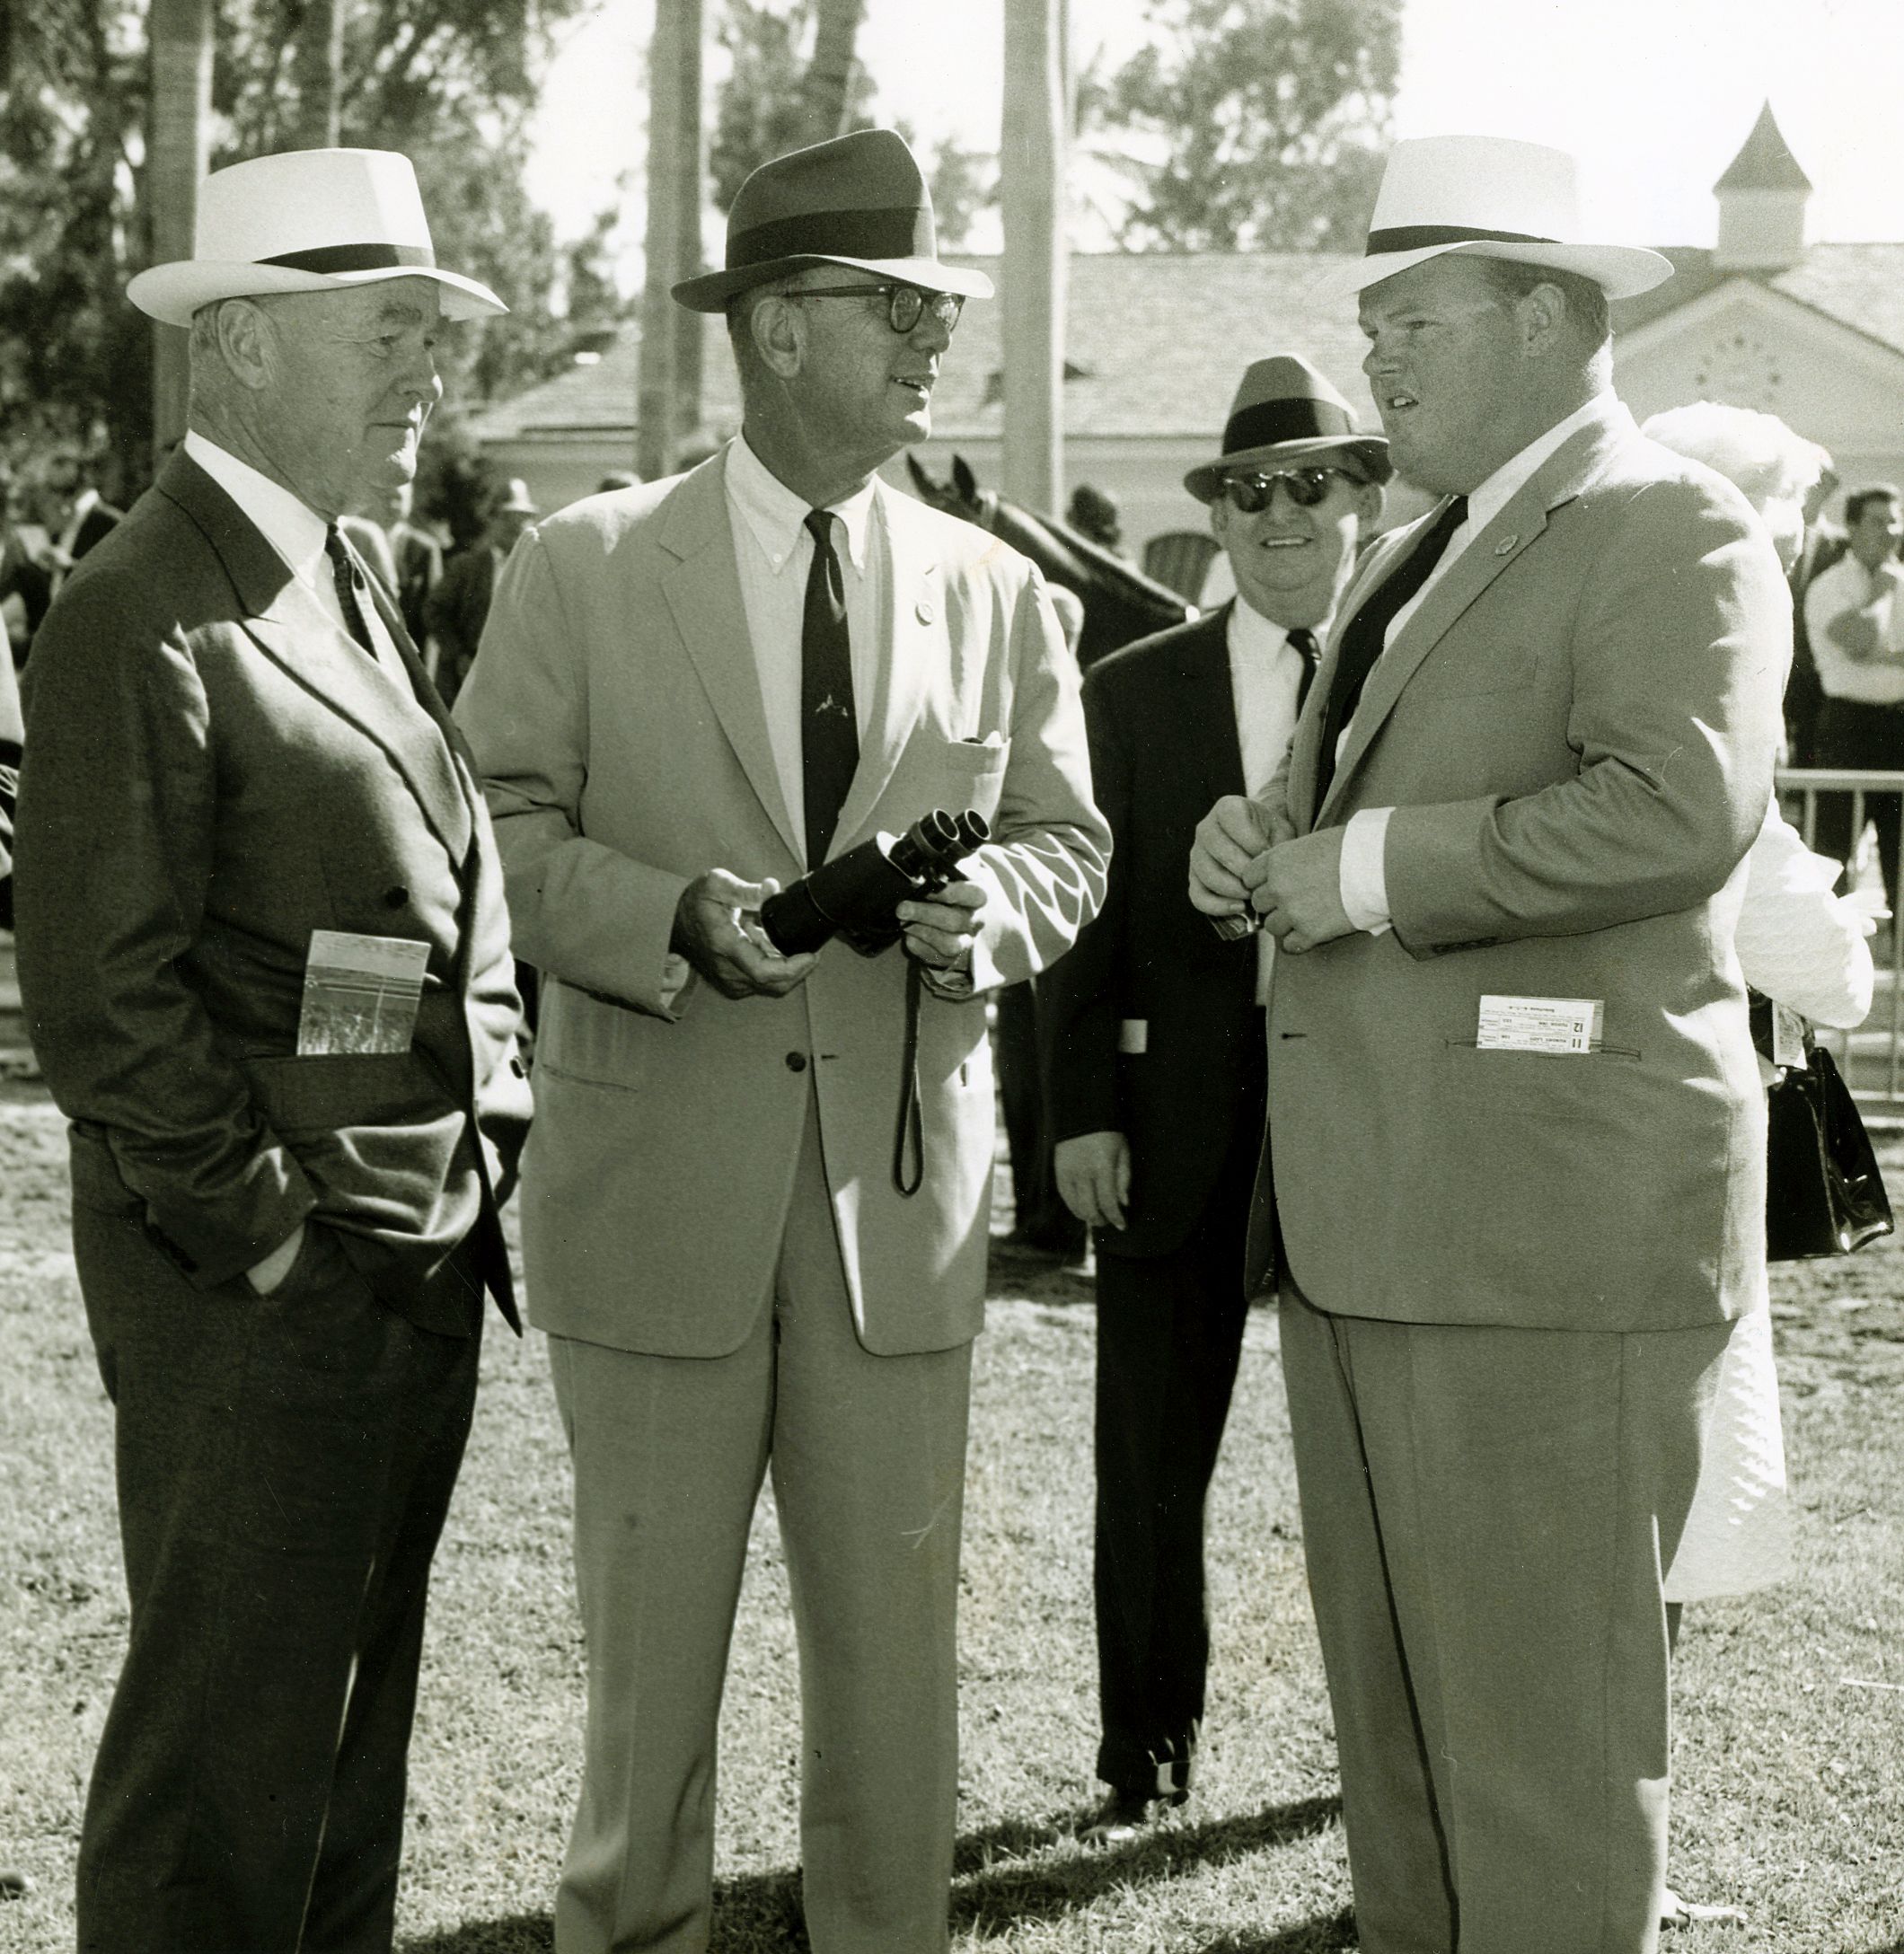 Ogden Phipps, Bull Hancock, and Dinny Phipps in the paddock in 1966 (Keeneland Library Thoroughbred Times Collection)